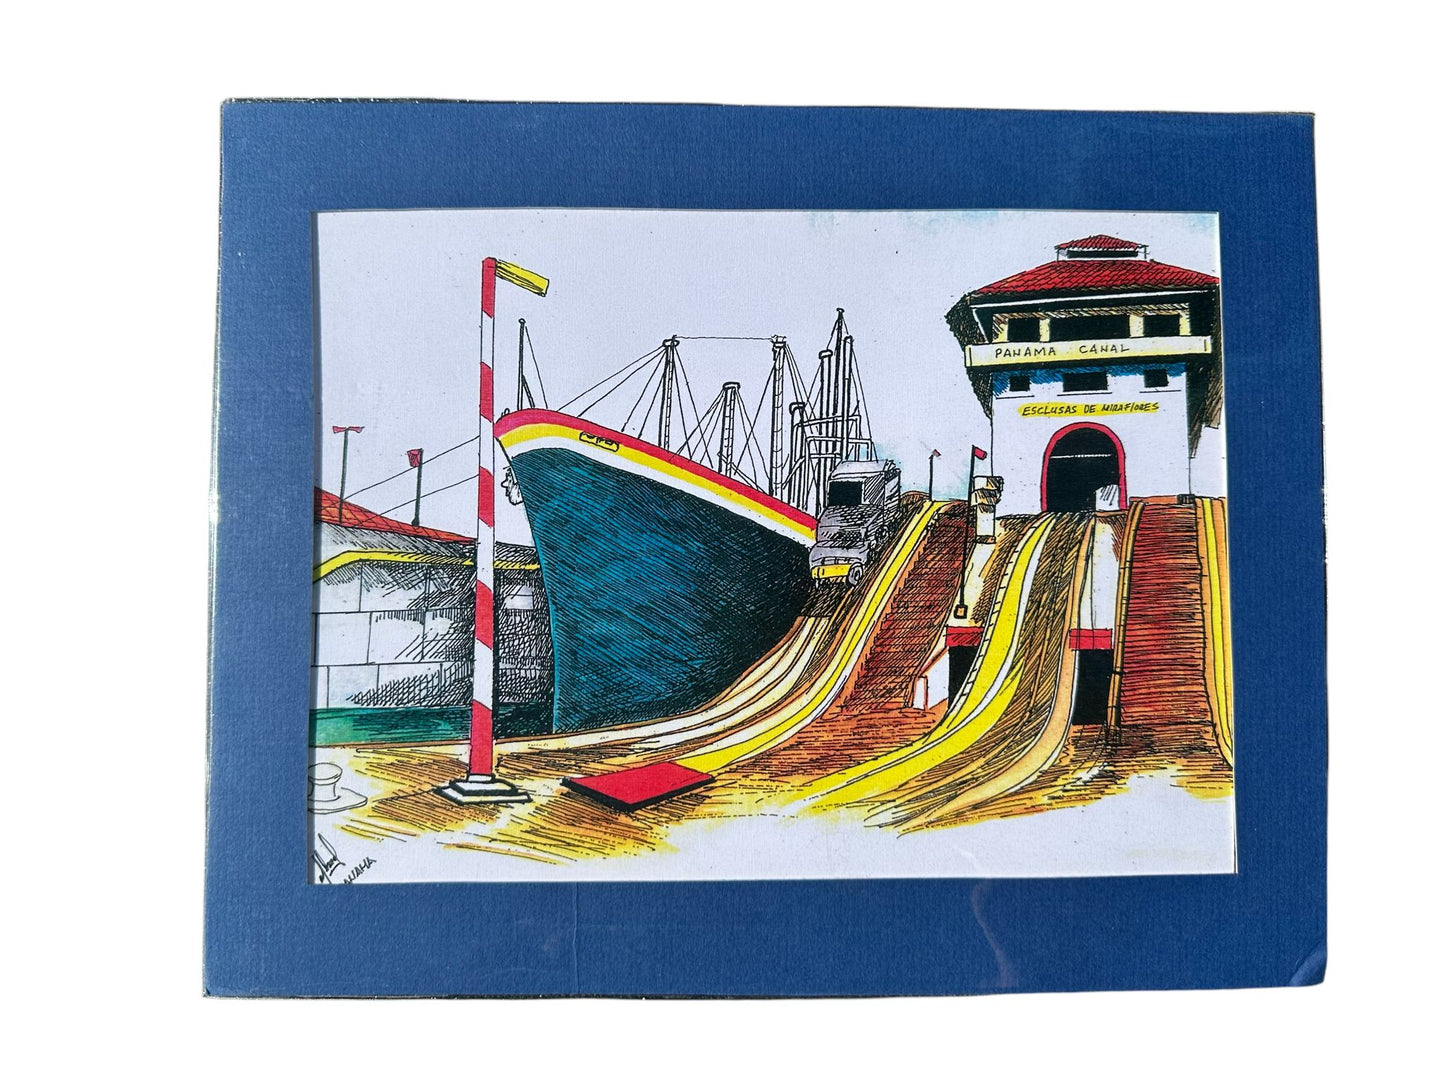 Panamanian Prints Wall Art for Home or Office